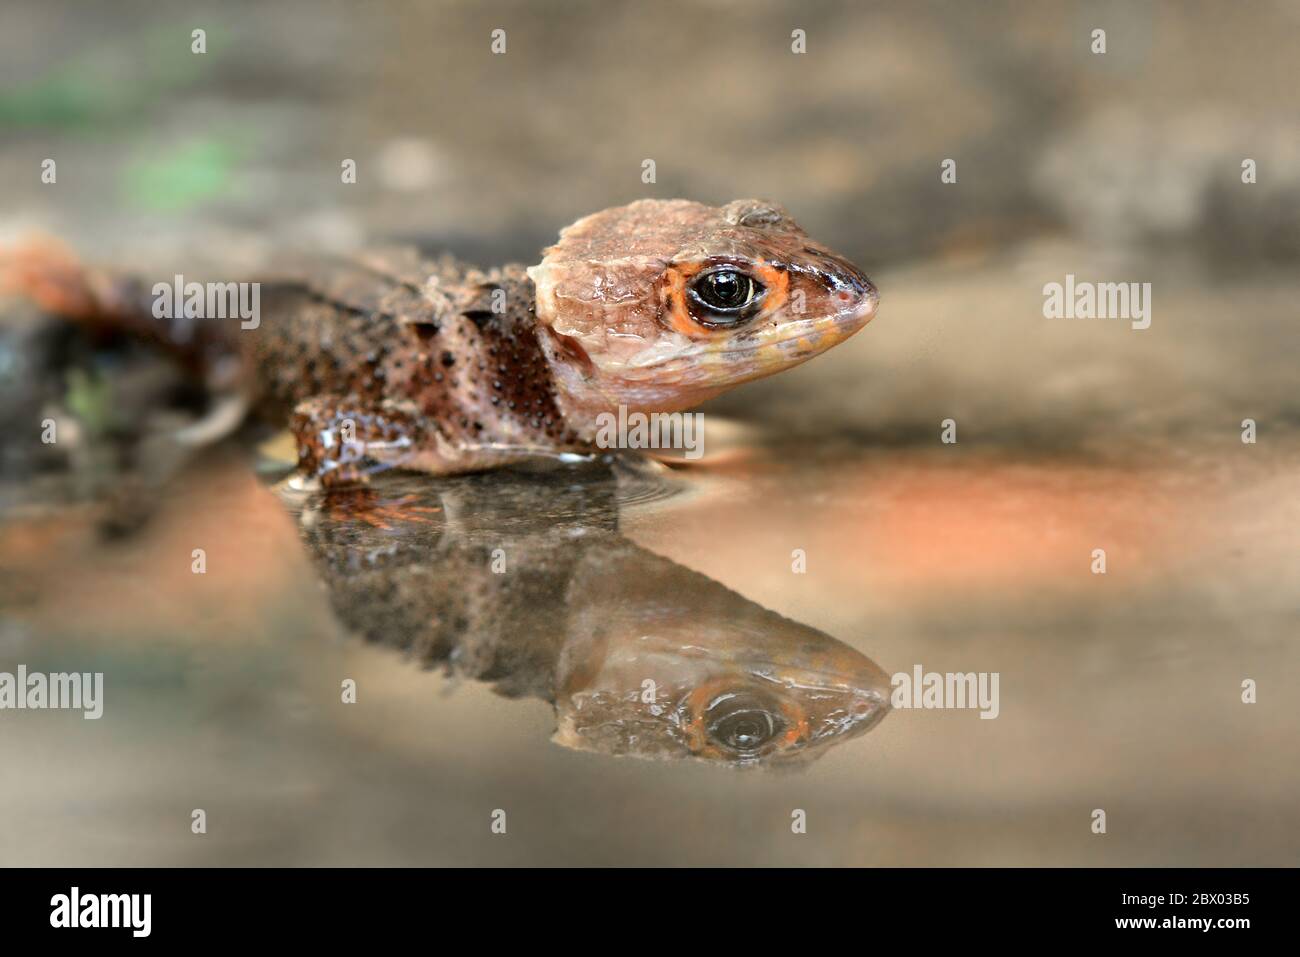 Crock skink is a reptile from indonesia Stock Photo